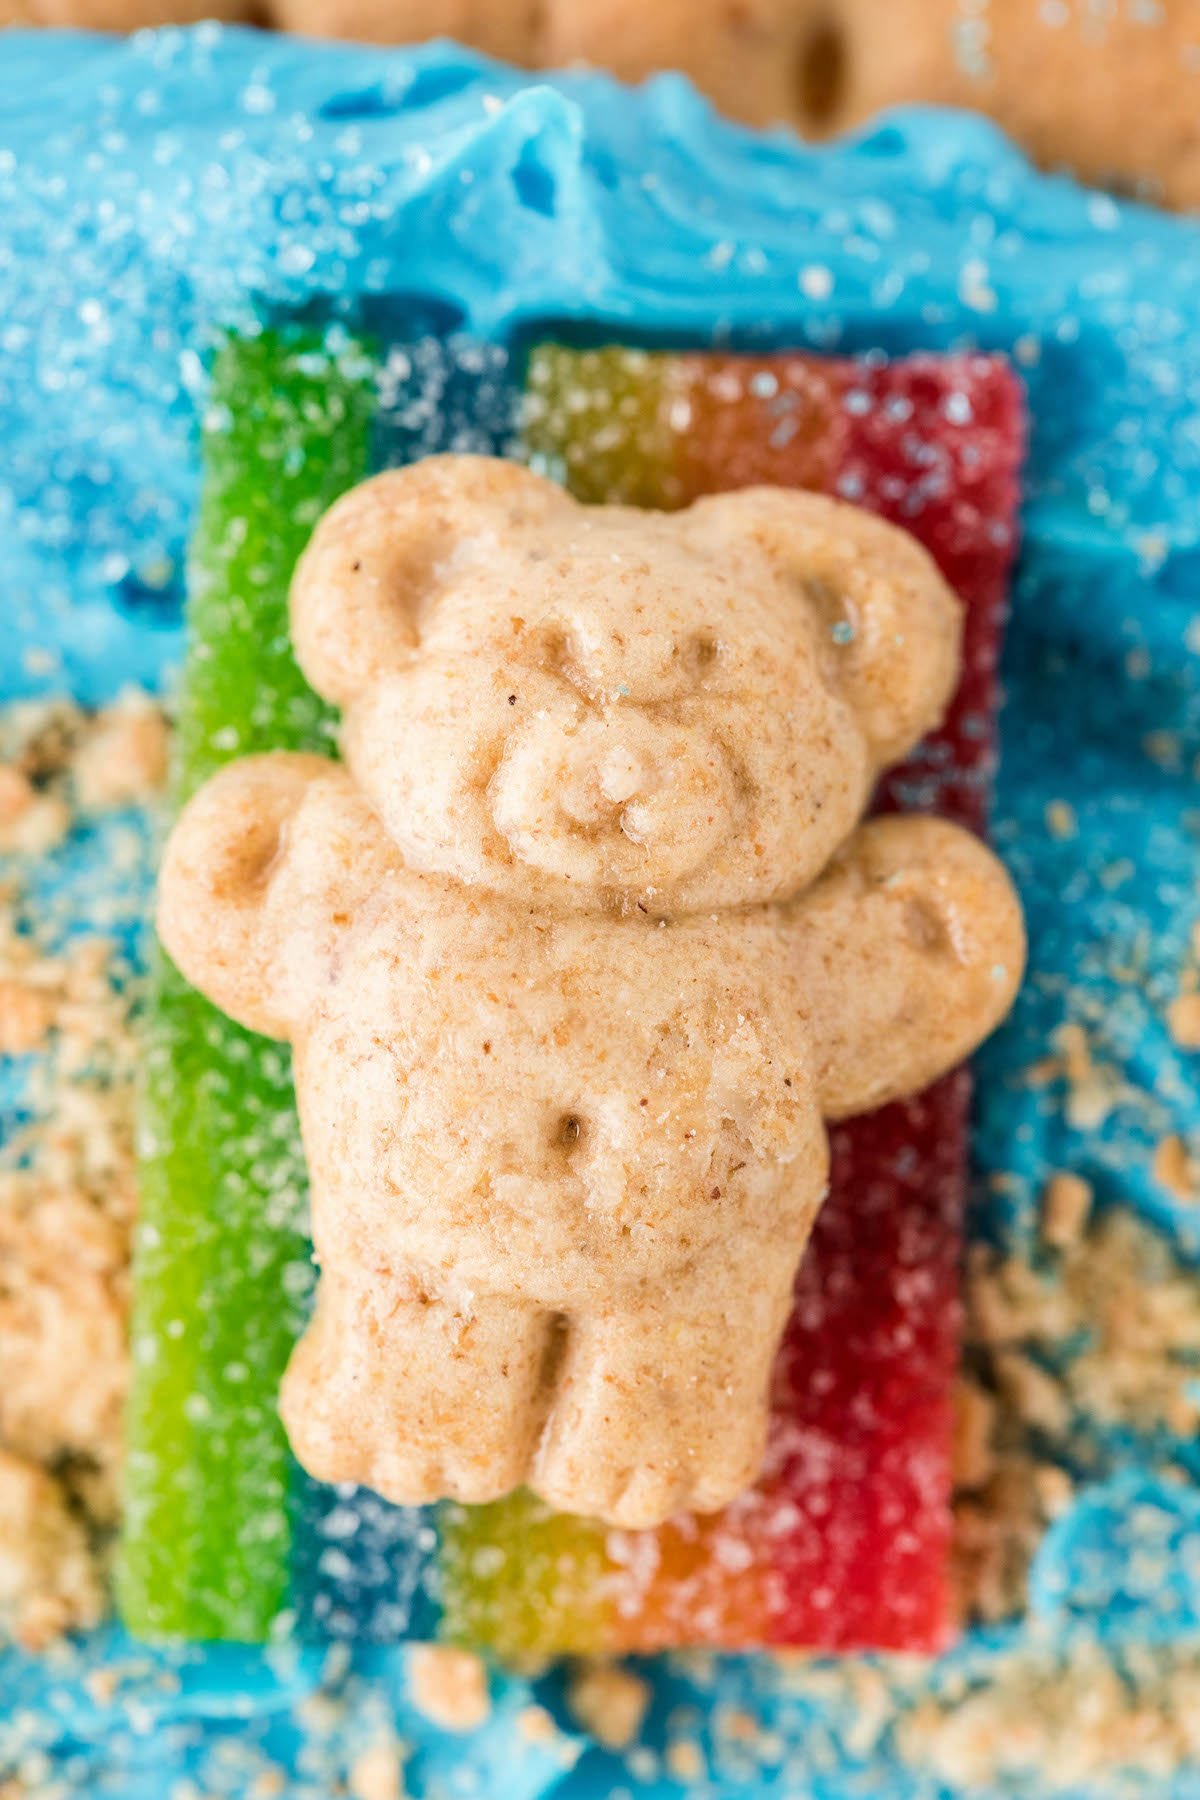 super cute beach themed teddy graham laying on a candy towel